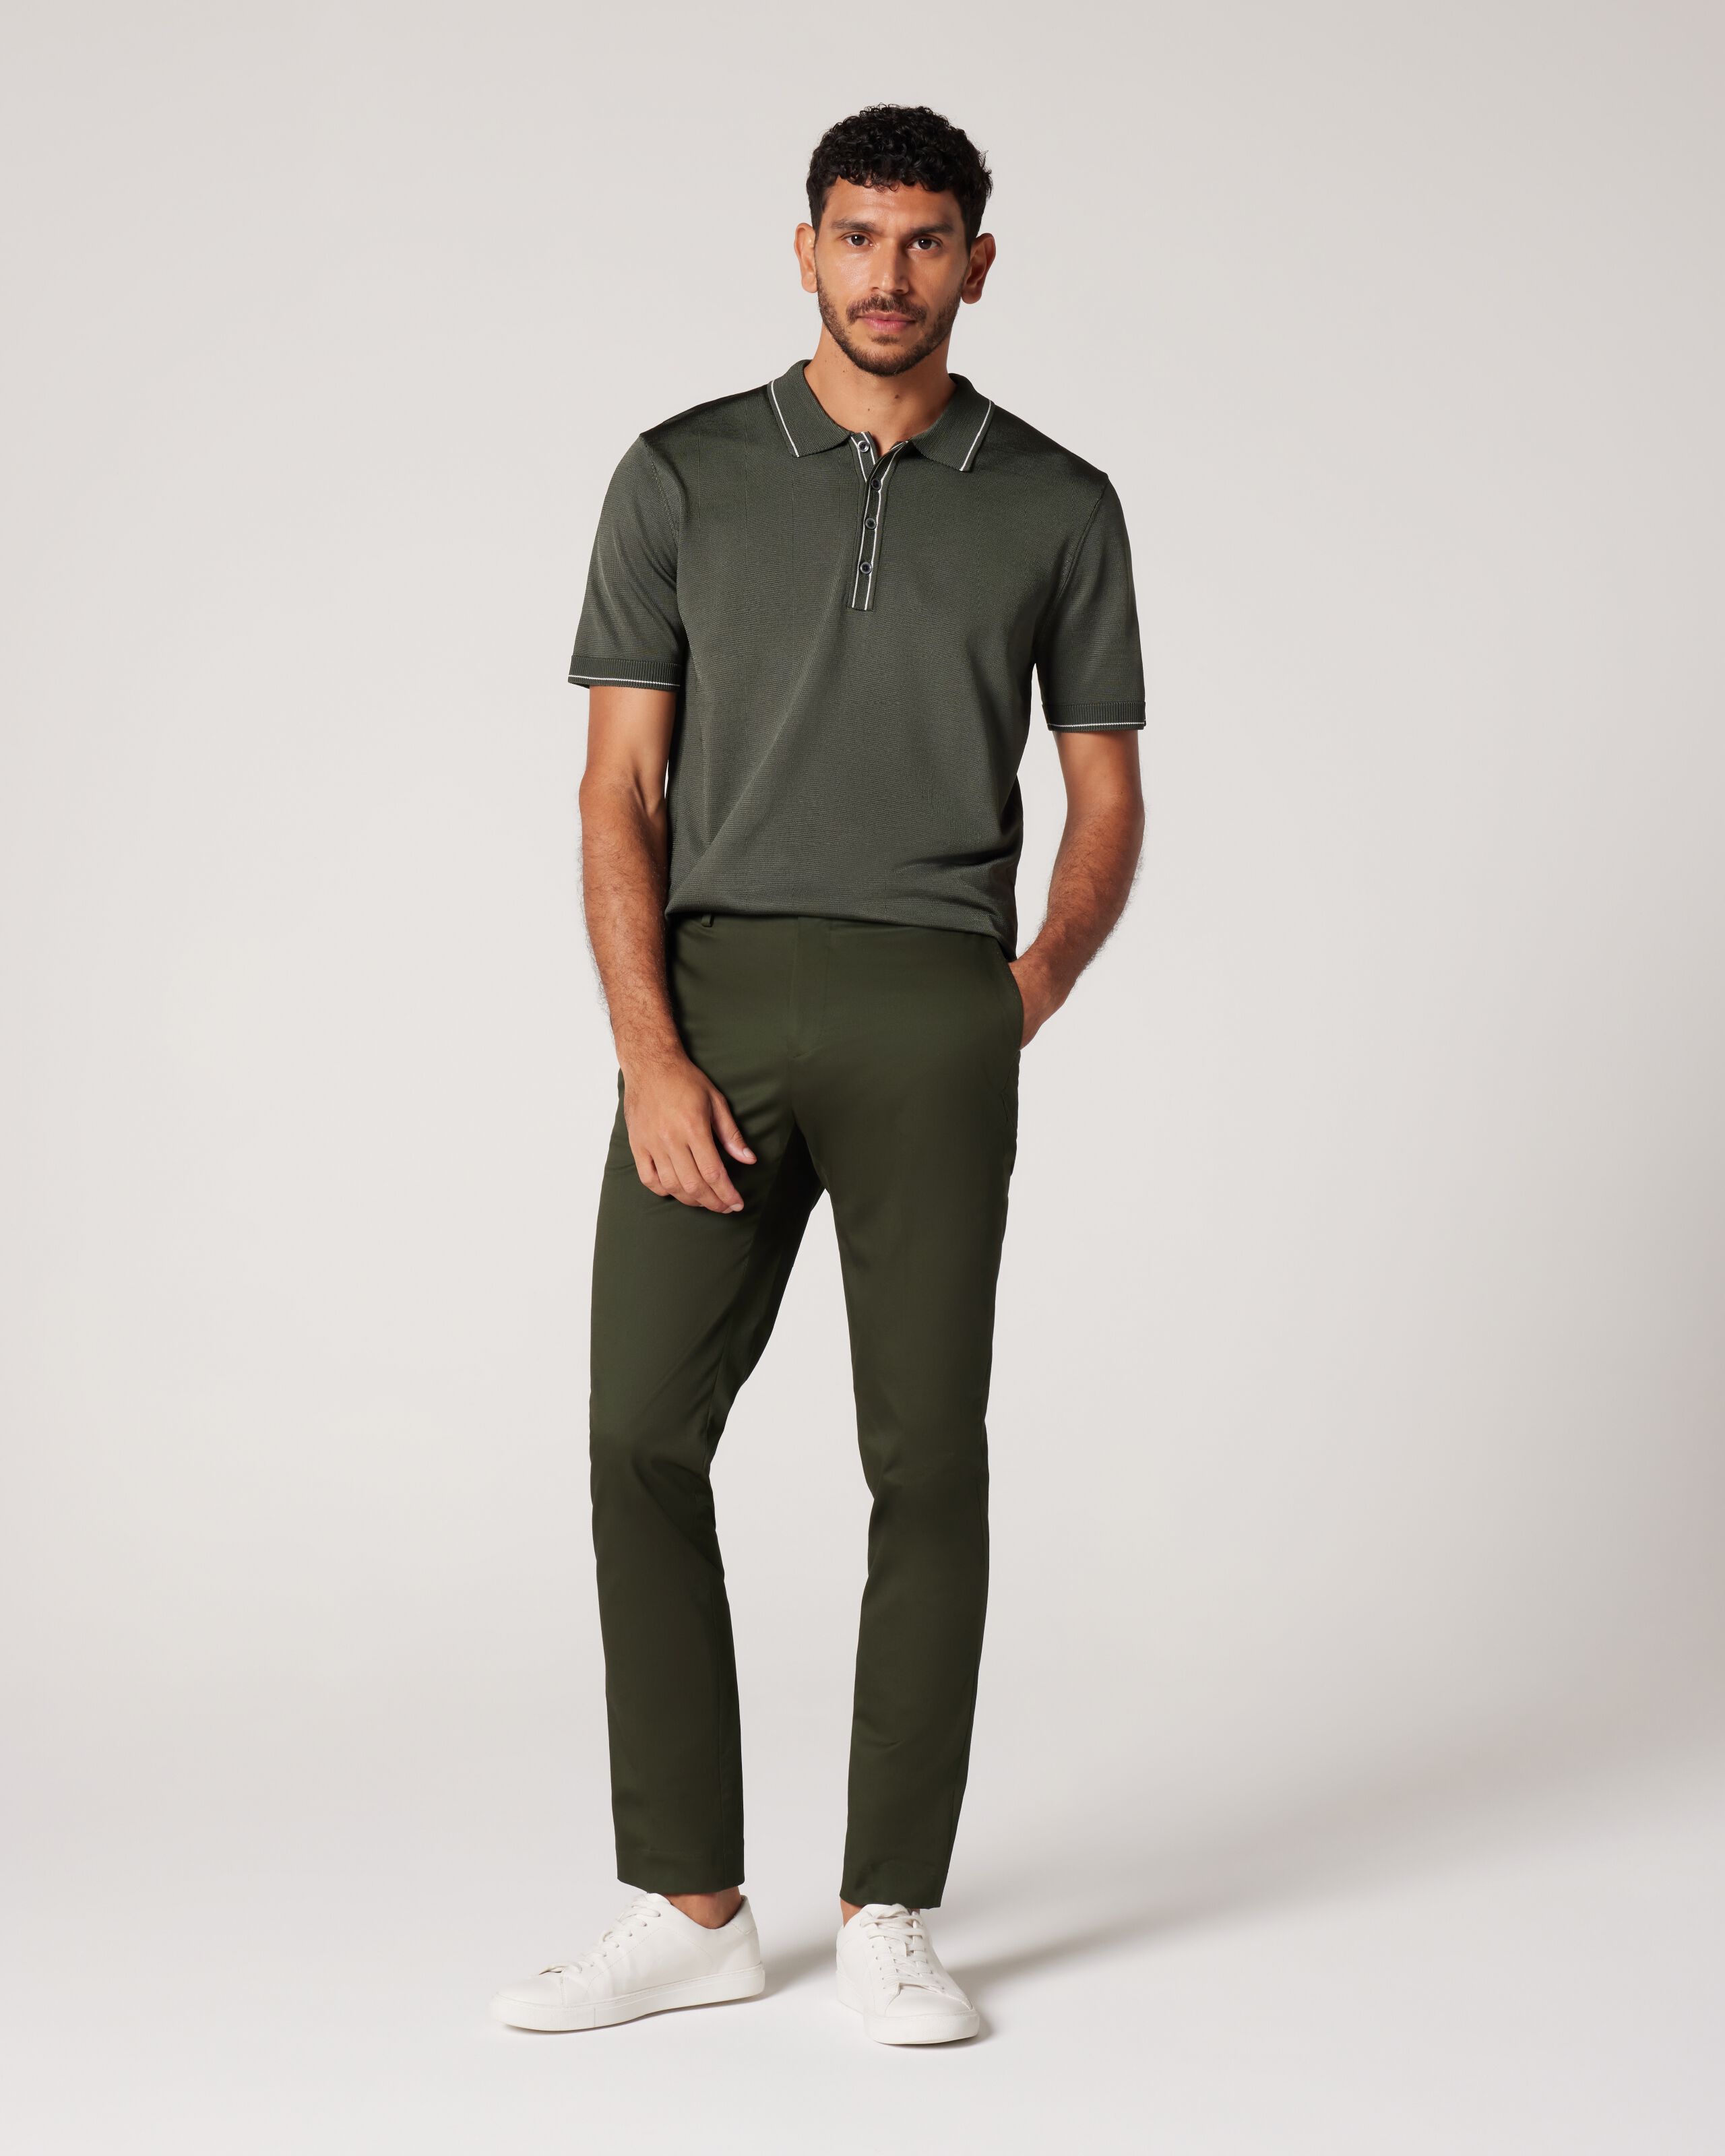 Green Pants Outfit / Suit Dress To Impress The Pants Of Your Dreams | Smart  casual menswear, Mens casual outfits summer, Mens fashion casual outfits